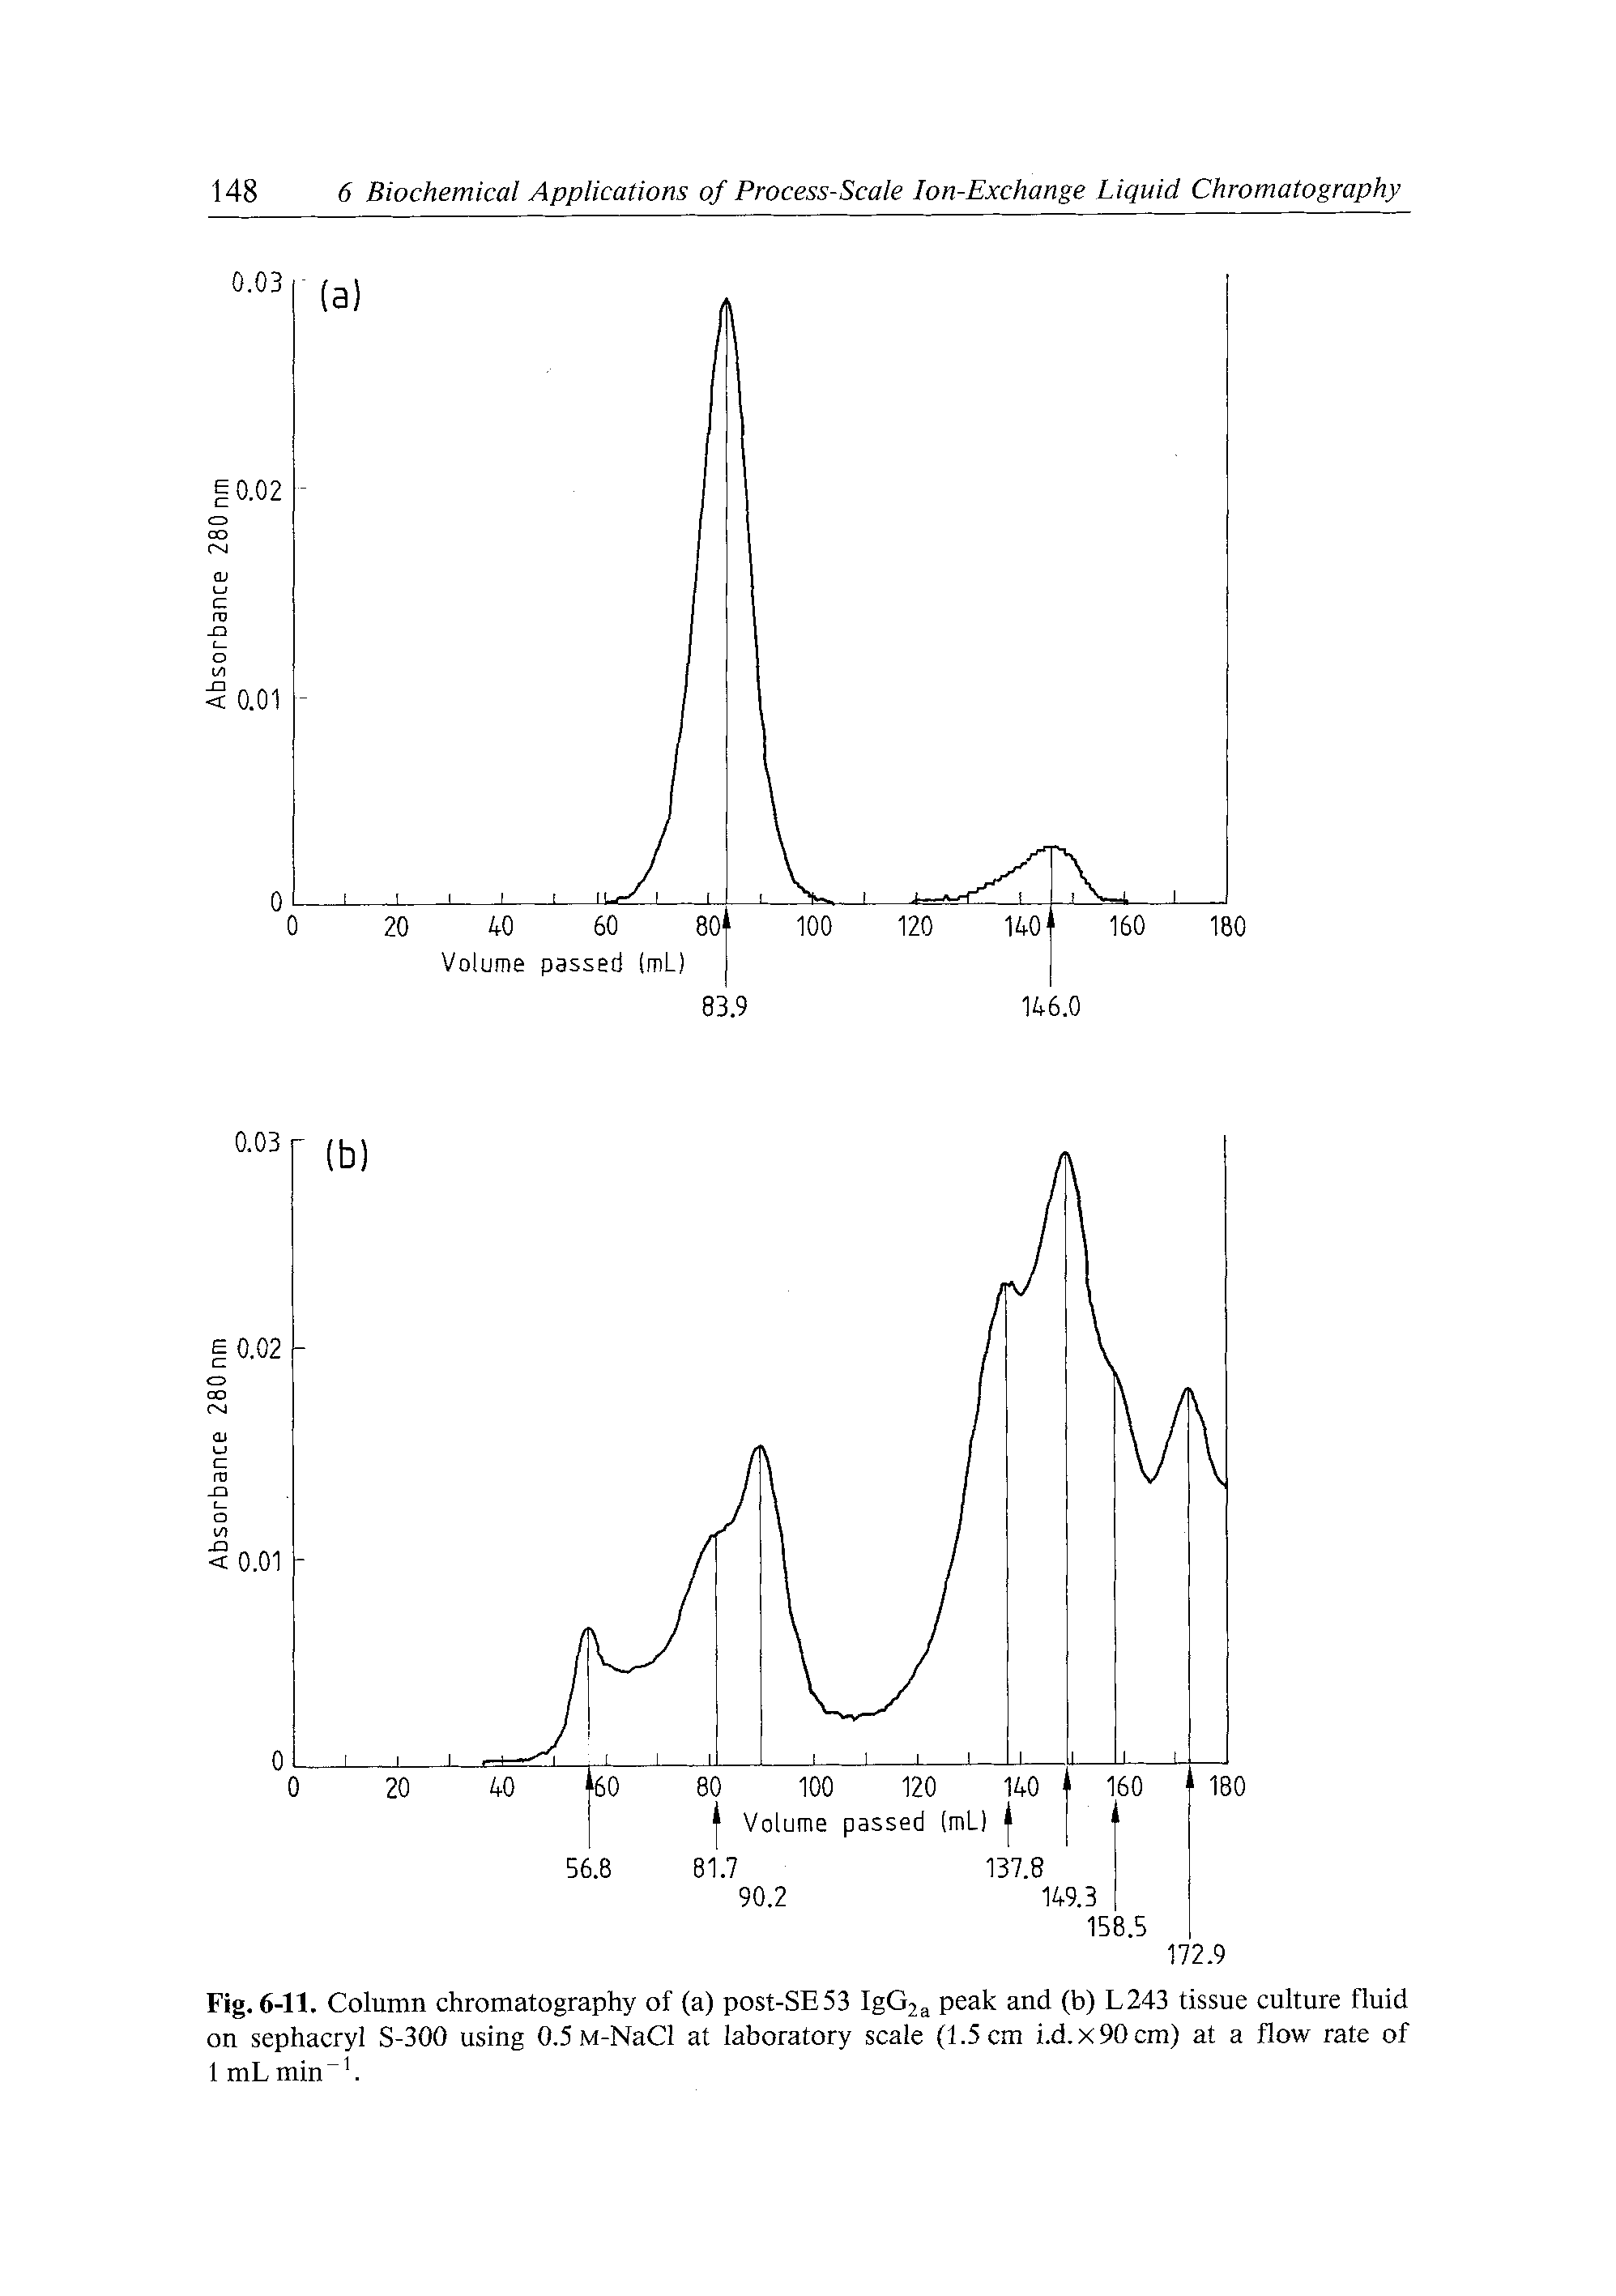 Fig. 6-11. Column chromatography of (a) post-SE53 IgGj peak and (b) L243 tissue culture fluid on sephacryl S-300 using 0.5 M-NaCl at laboratory scale (1.5 cm i.d.x90cm) at a flow rate of 1 mL min. ...